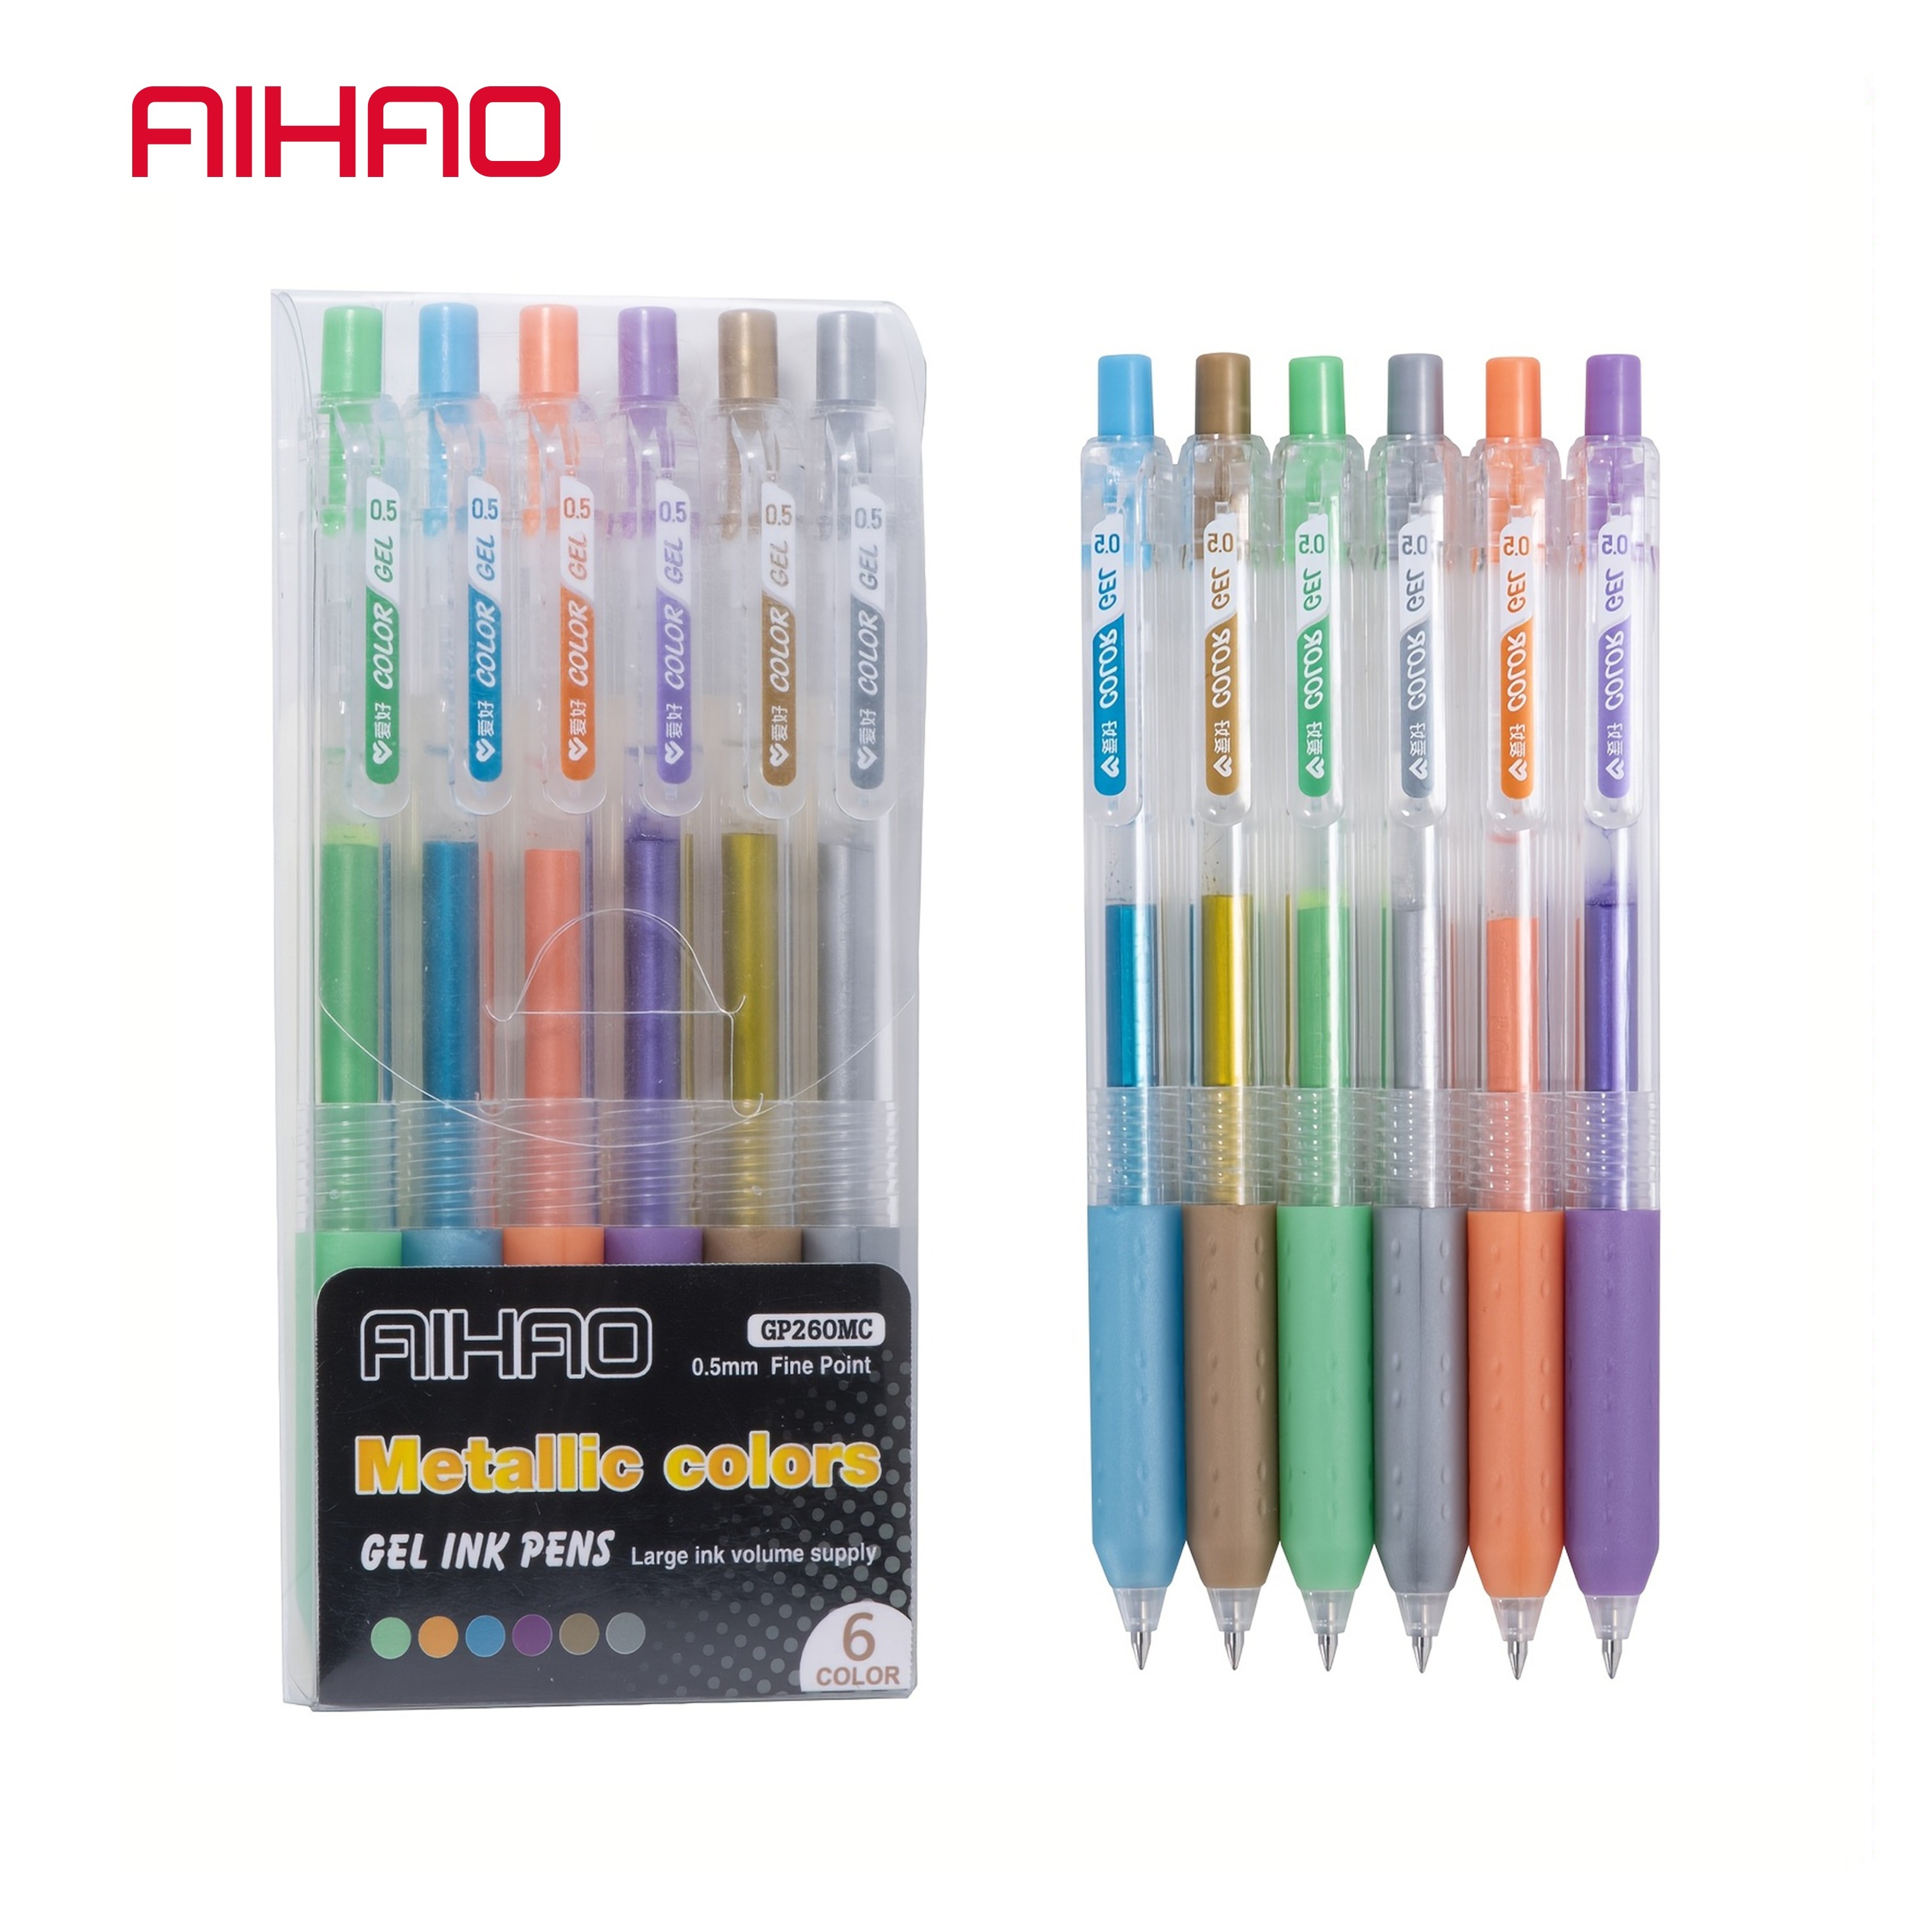 12pcs/pack Straight Liquid Quick Dry Gel Pens Large Capacity Colored Pens  0.5mm Fine Point Signature Pen Rolling Ball Pens,Straight Liquid Visible Ink